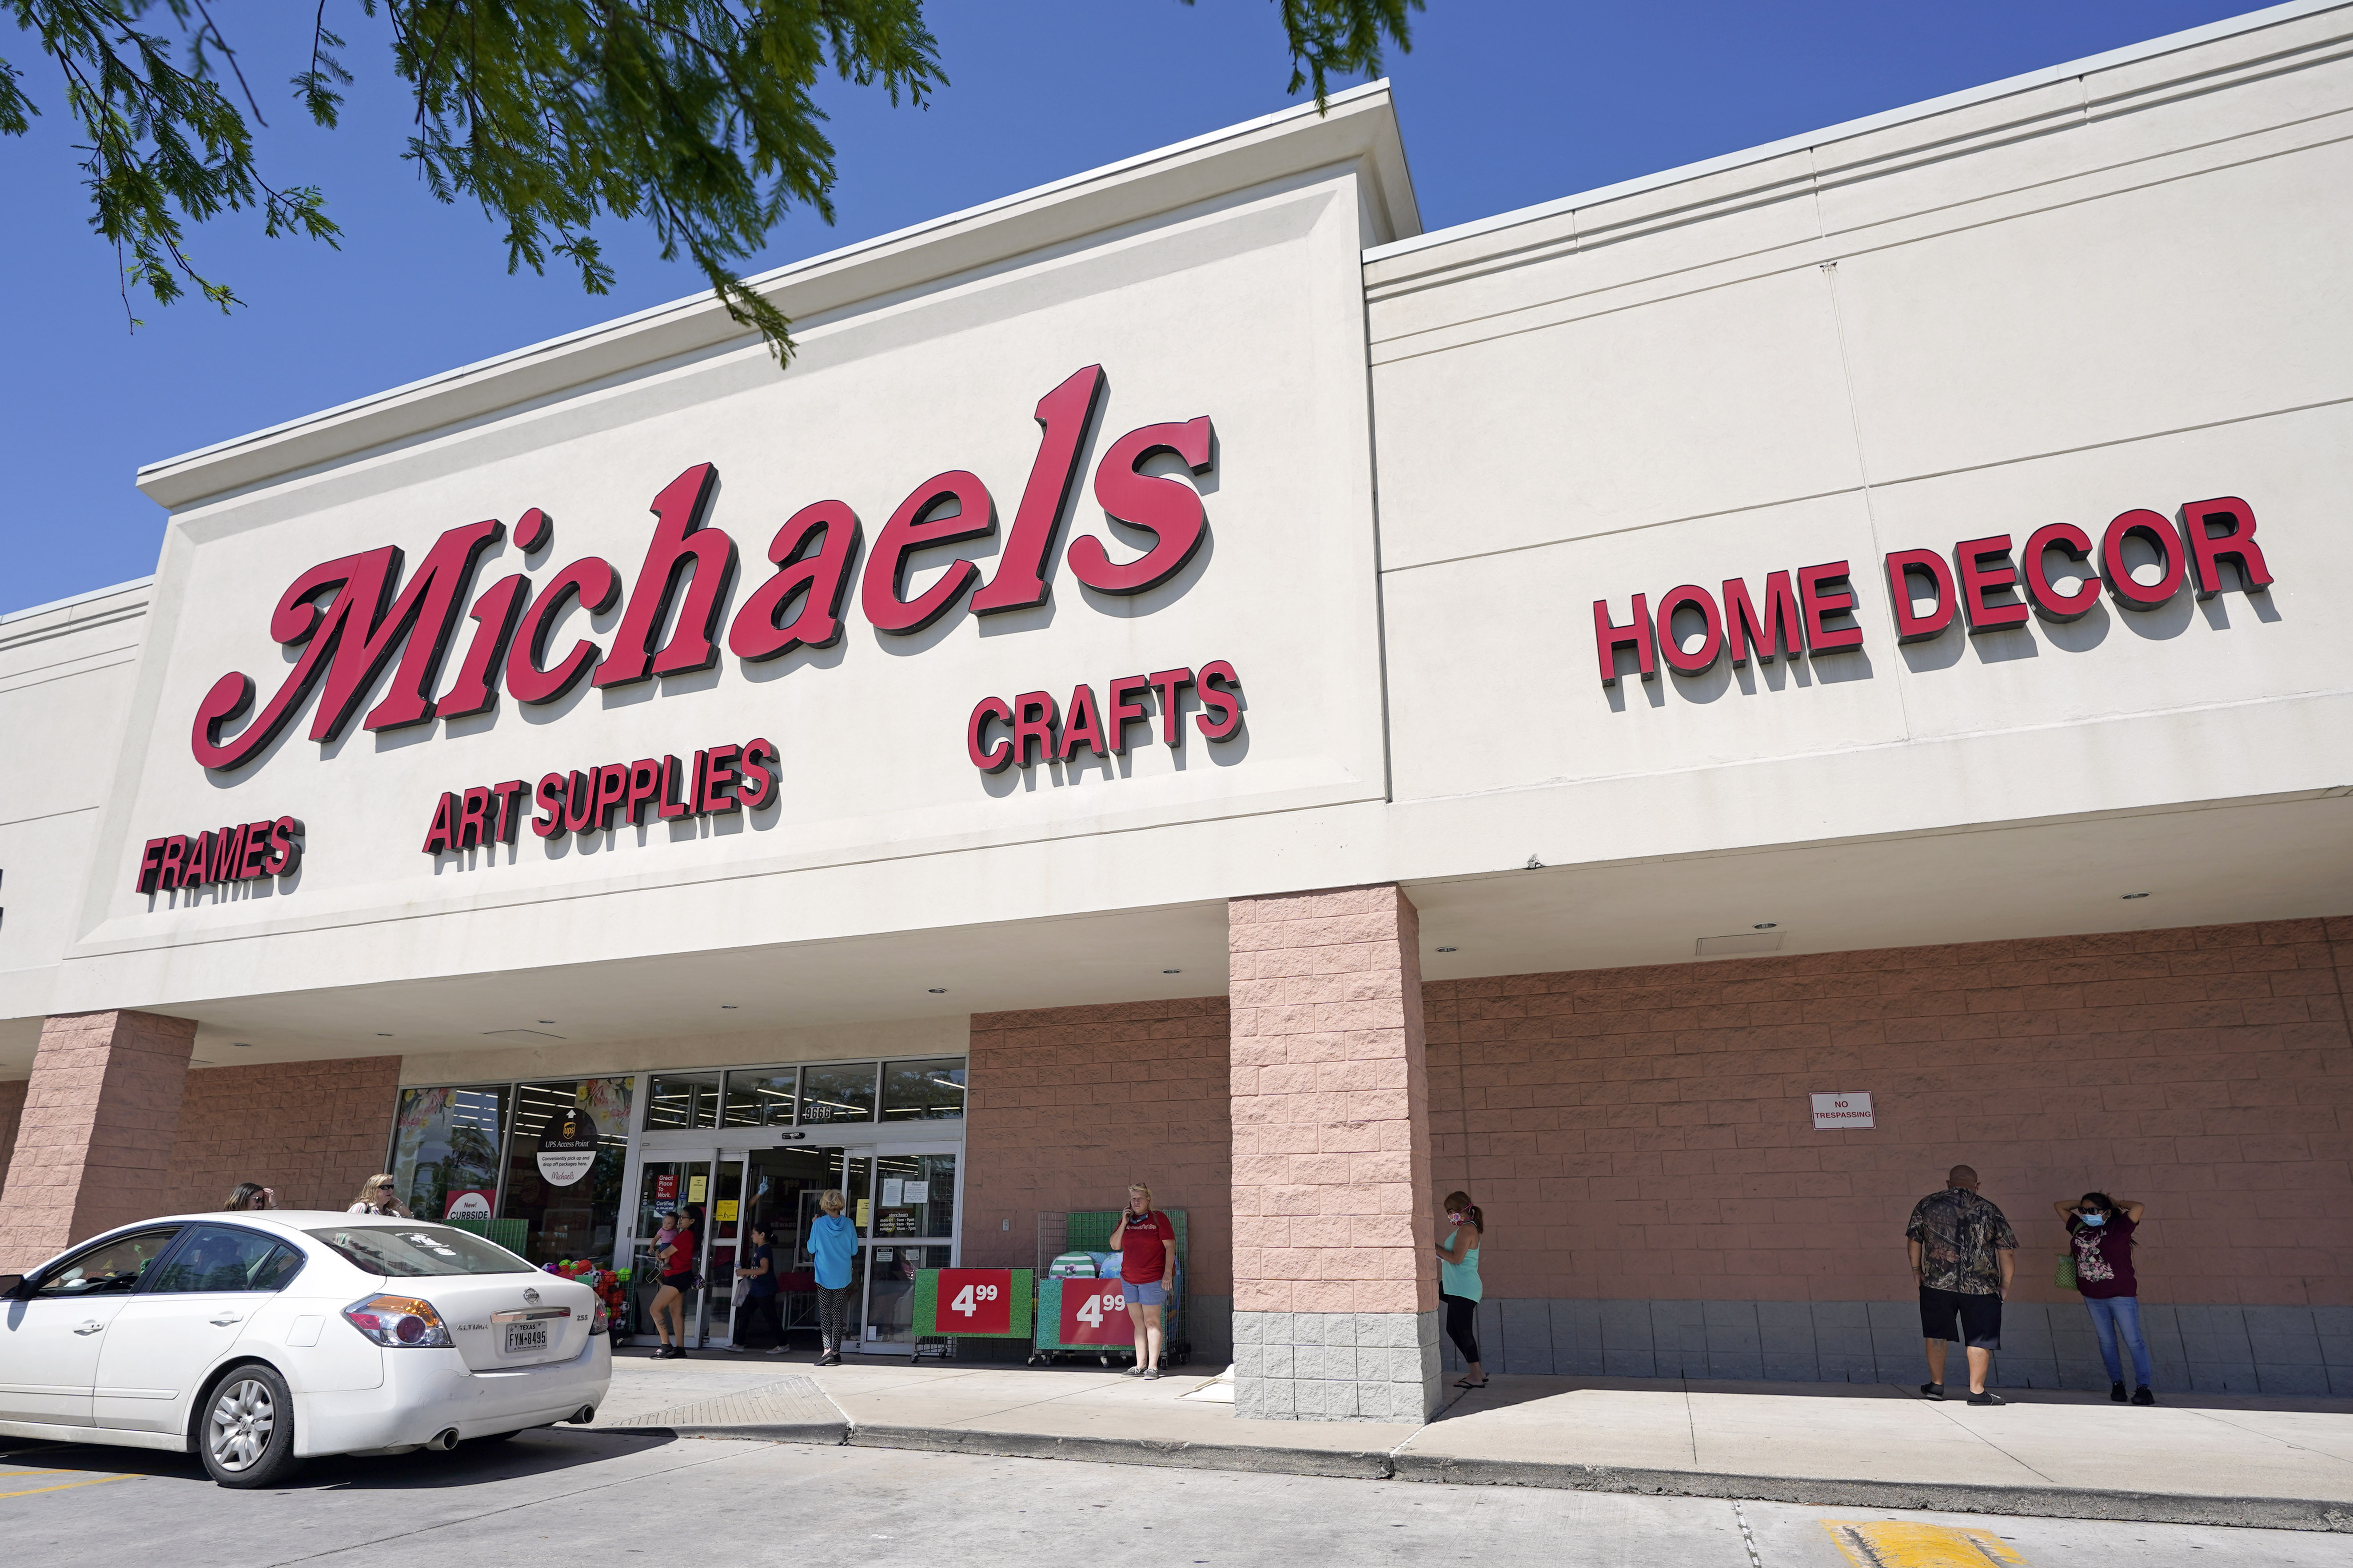 Michaels craft stores now function as UPS drop off and pick up locations -  FreightWaves